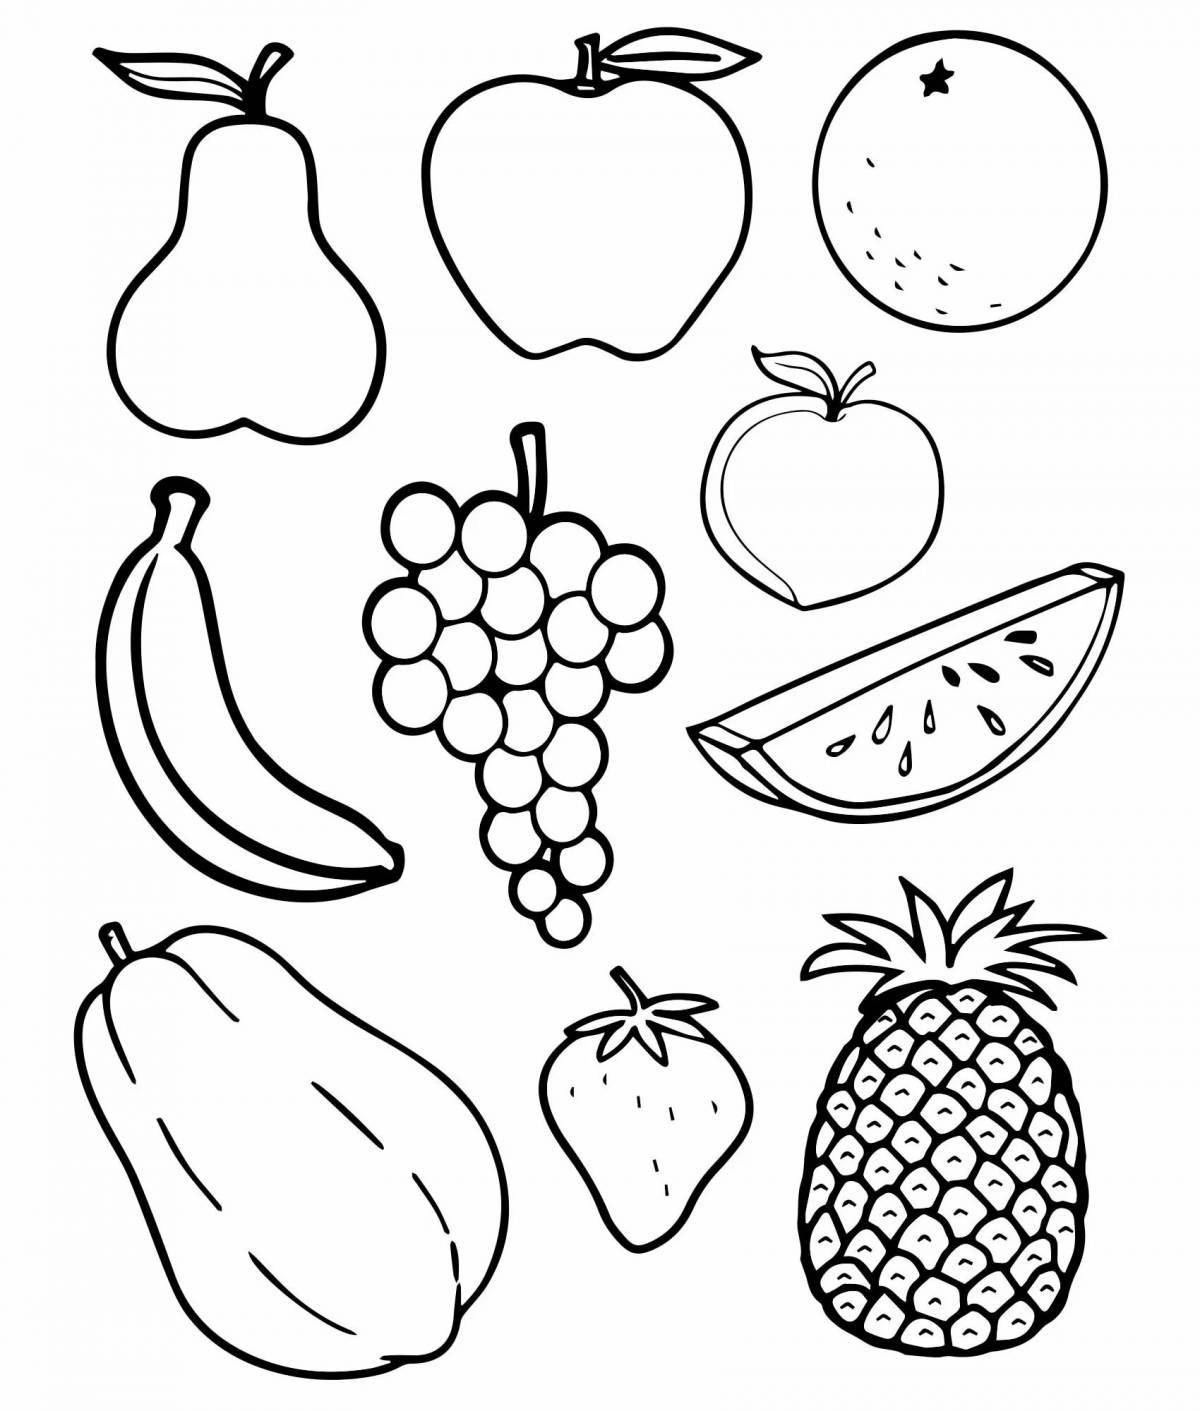 Inviting fruit coloring pages for girls